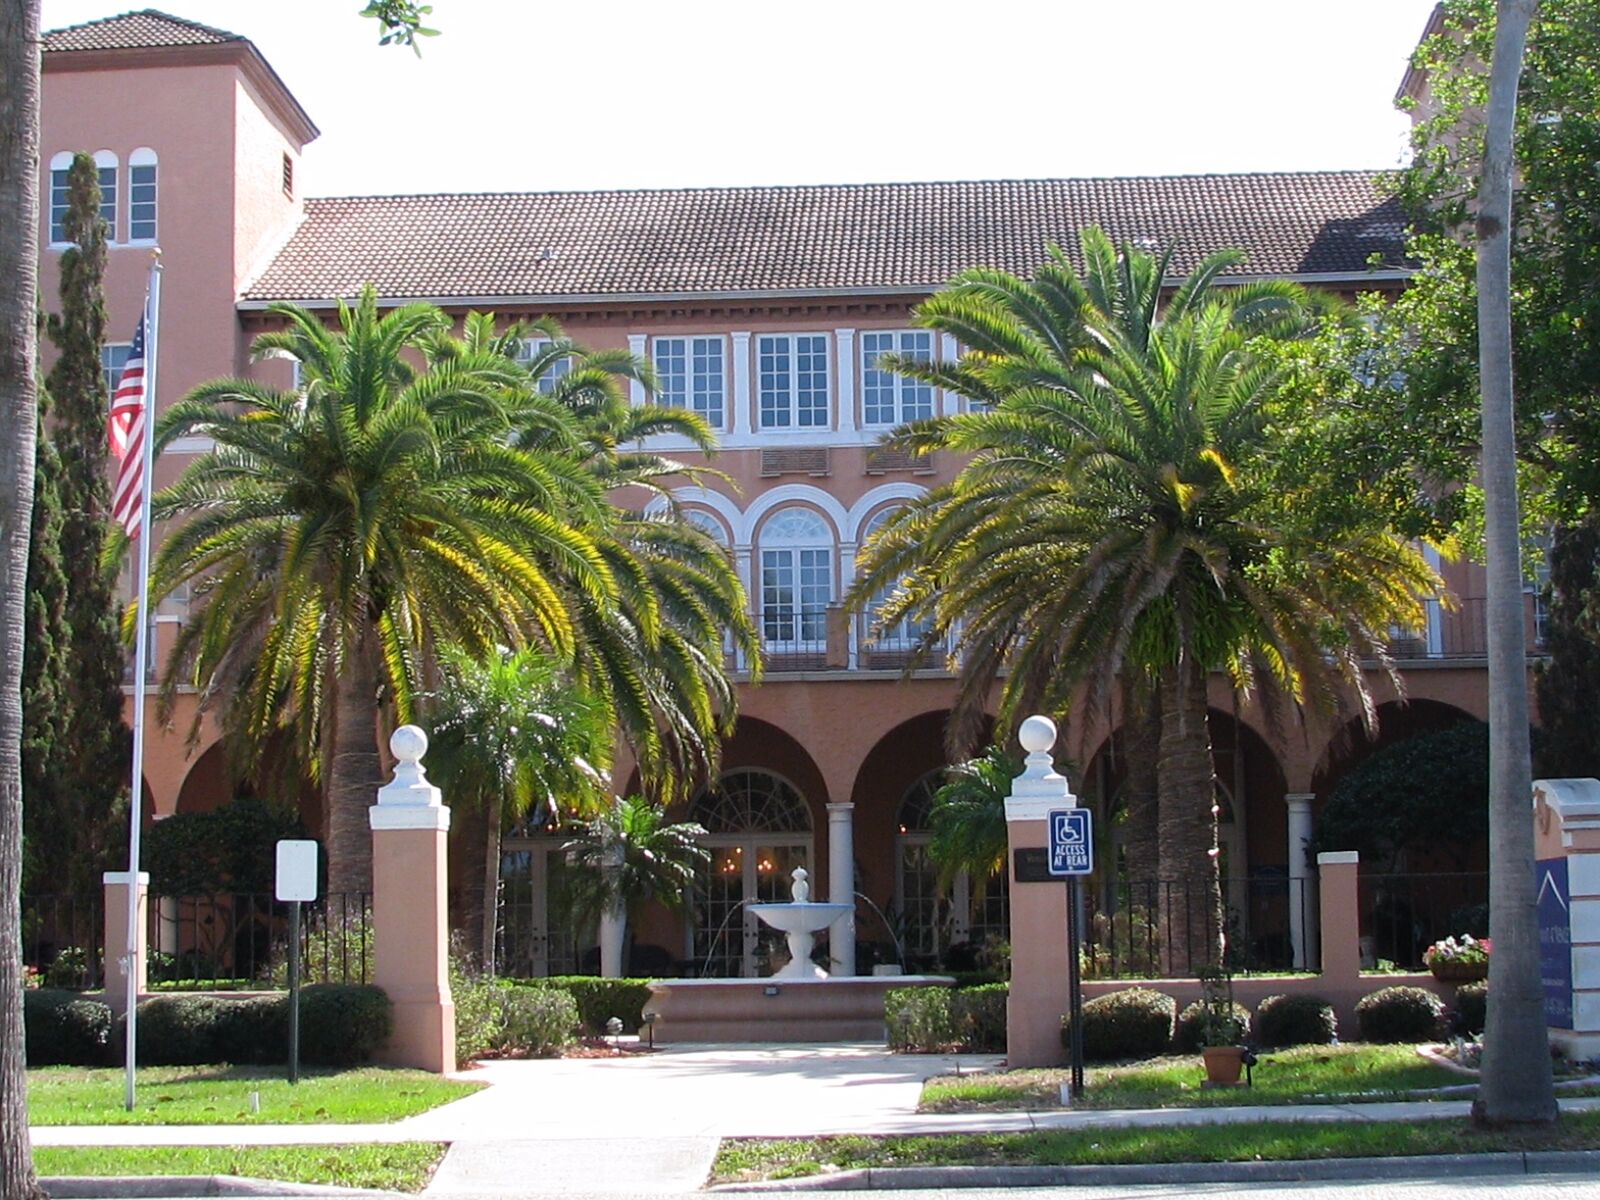 The exterior of Venice Center for Independence and Assisted Living features a fountain, and palm trees.